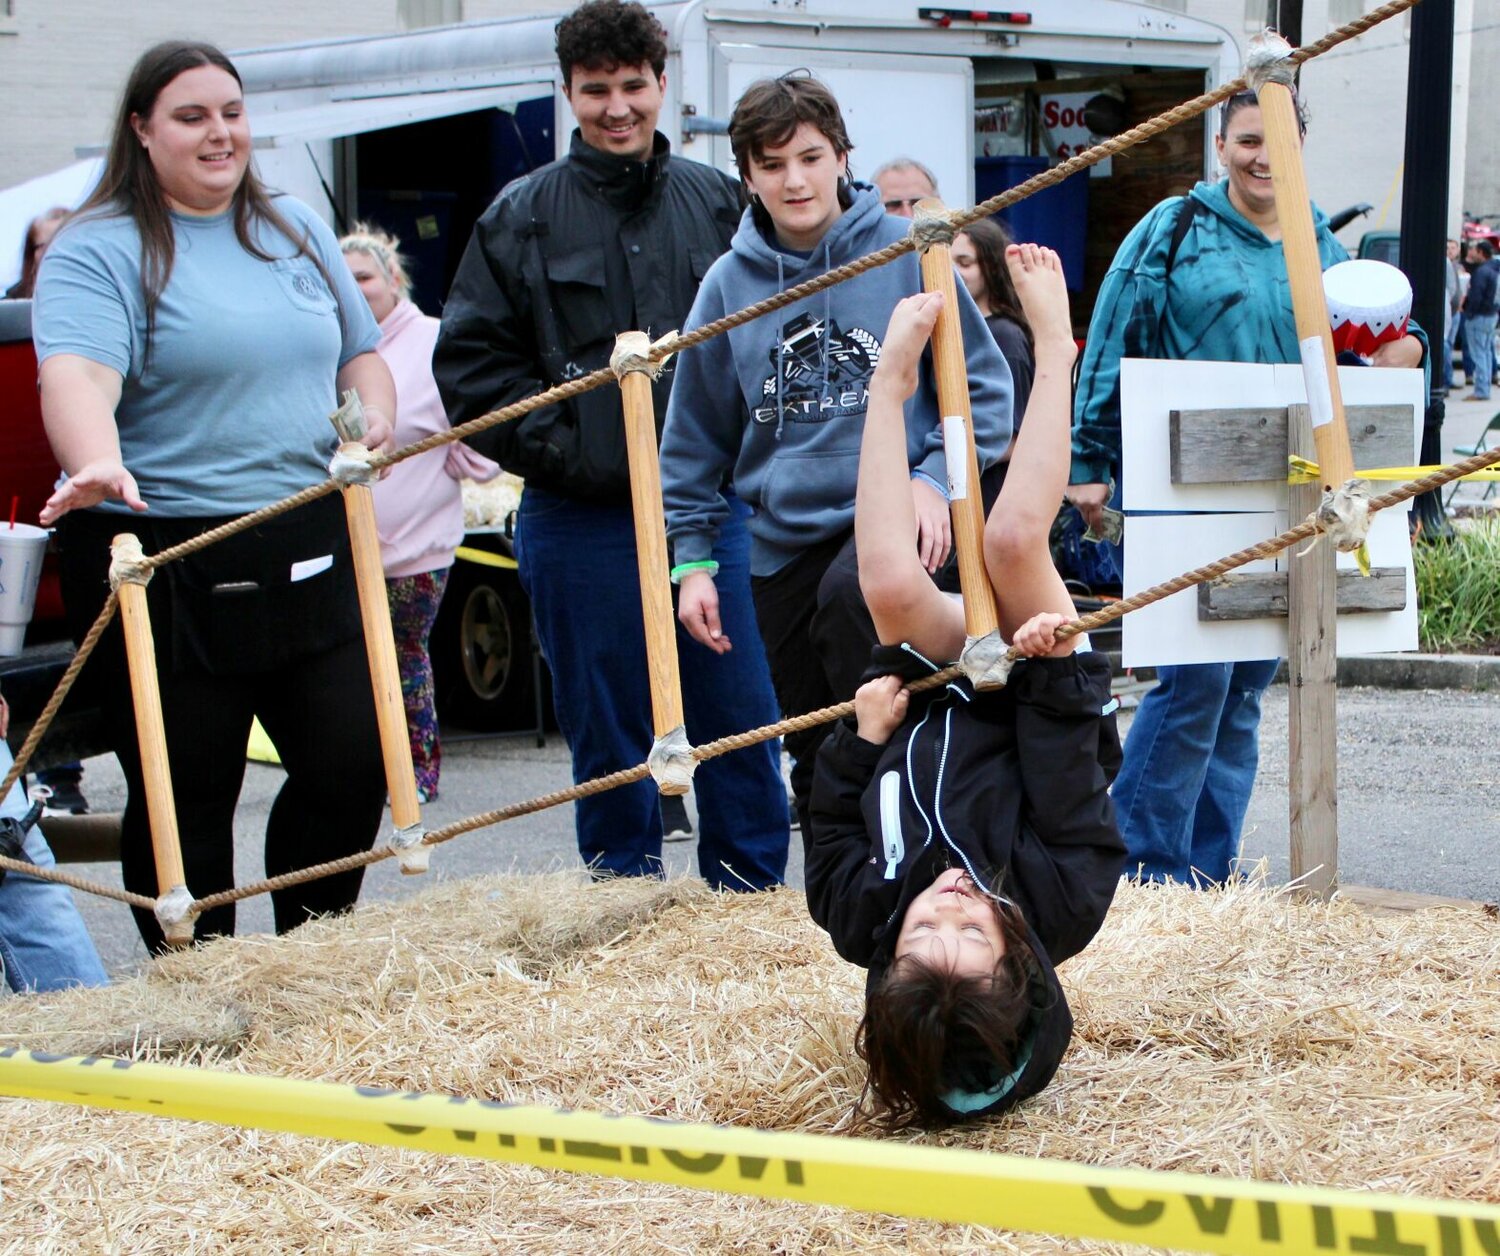 Despite falling temperatures and windy conditions, there was a great turnout at the Thayer Chamber of Commerce Fall Festival held Saturday in downtown Thayer. There were plenty of games of skill for the younger set, many of them fundraisers for local youth and religious organizations. Here, a girl takes a turn at trying to climb a rope ladder to reach a $20 bill taped to the top, but gets topsy-turvy before reaching her goal and landing upside down on the straw laid down below.